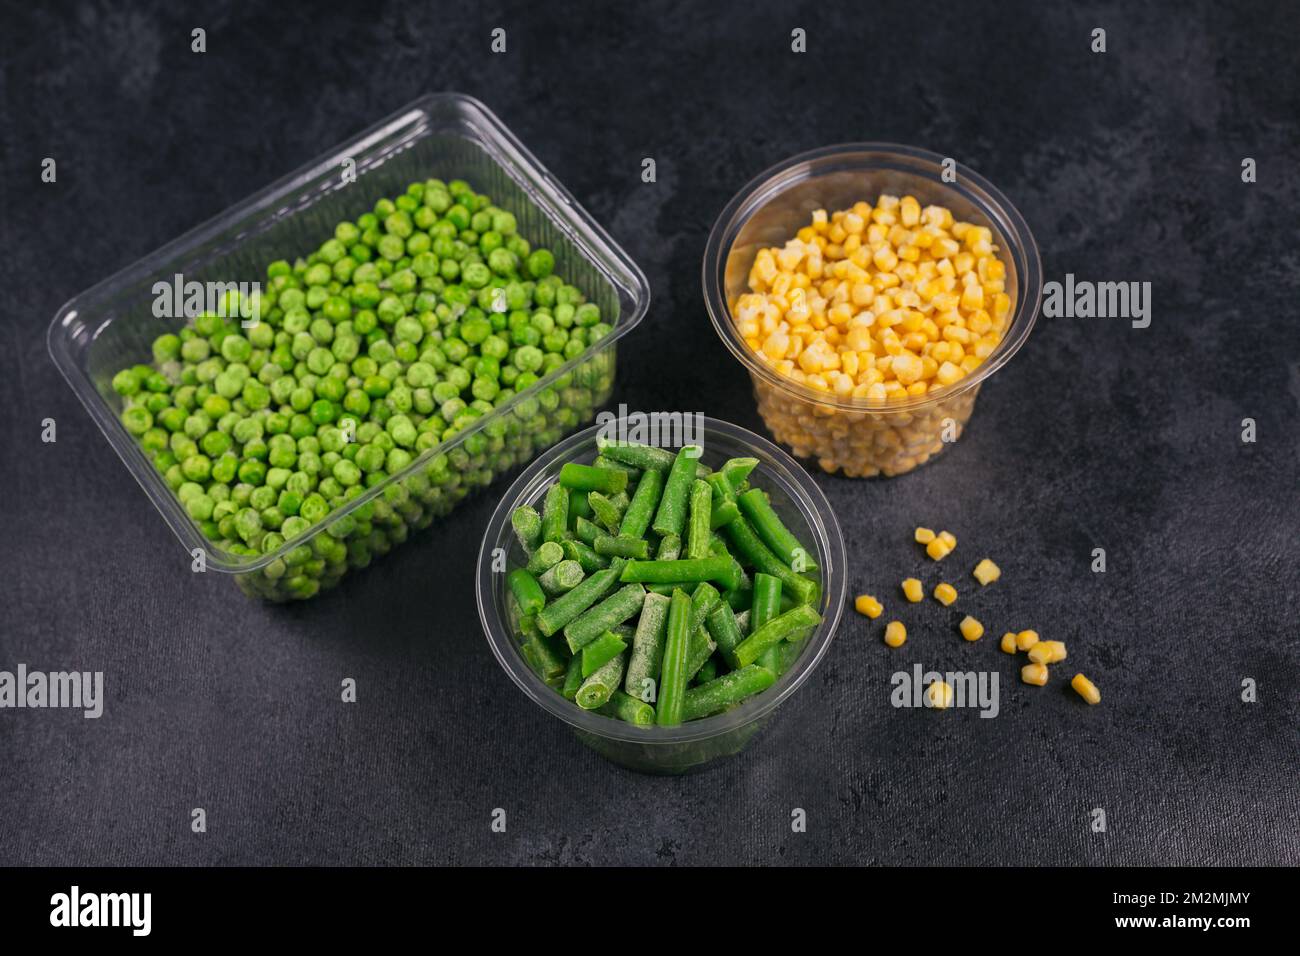 Plastic container with different organic deep frozen vegetables on a black table. Green peas, sweet corn and cut green beans in a box Stock Photo